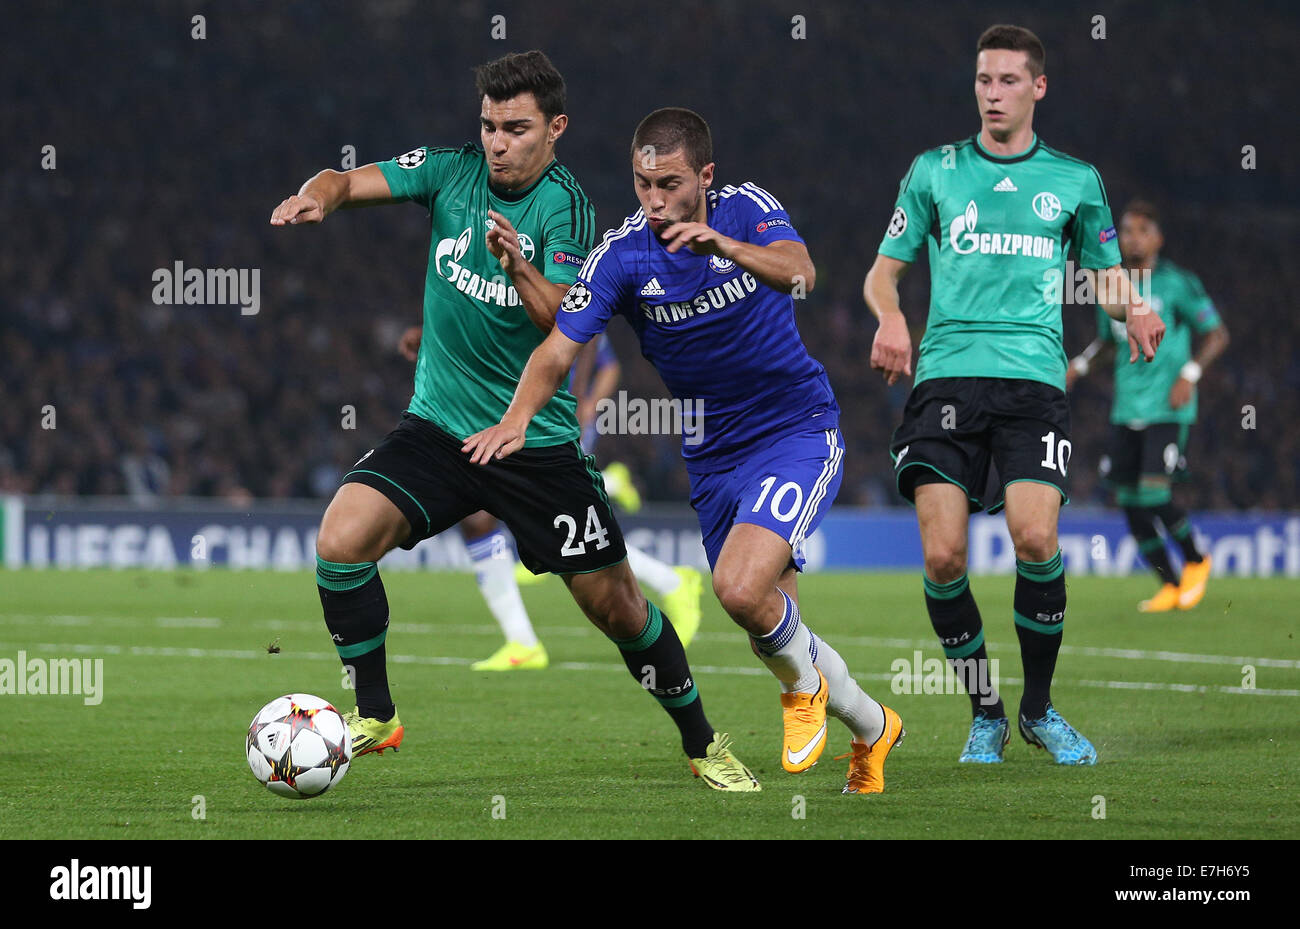 London, Britain. 17th Sep, 2014. Chelsea's Gary Cahill and Schalke's Kaan Ayhan (l) vie for the ball during the UEFA Champions League Group G soccer match between Chelsea FC and FC Schalke 04 at Stamford Bridge stadium in London, Britain, 17 September 2014. Photo: Ina Fassbender/dpa/Alamy Live News Stock Photo